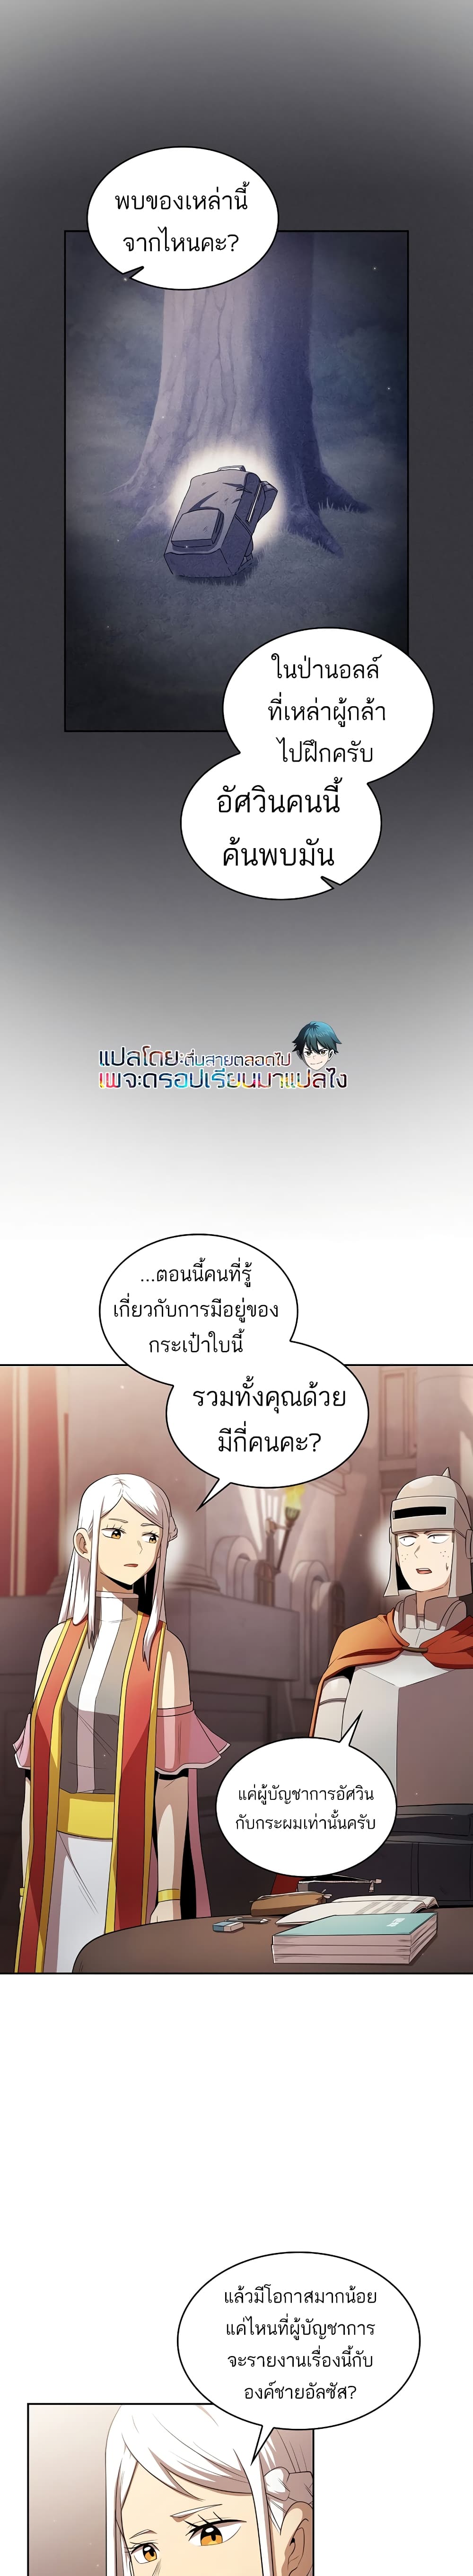 Is This Hero for Real à¸à¸­à¸à¸à¸µà¹ 33 (3)